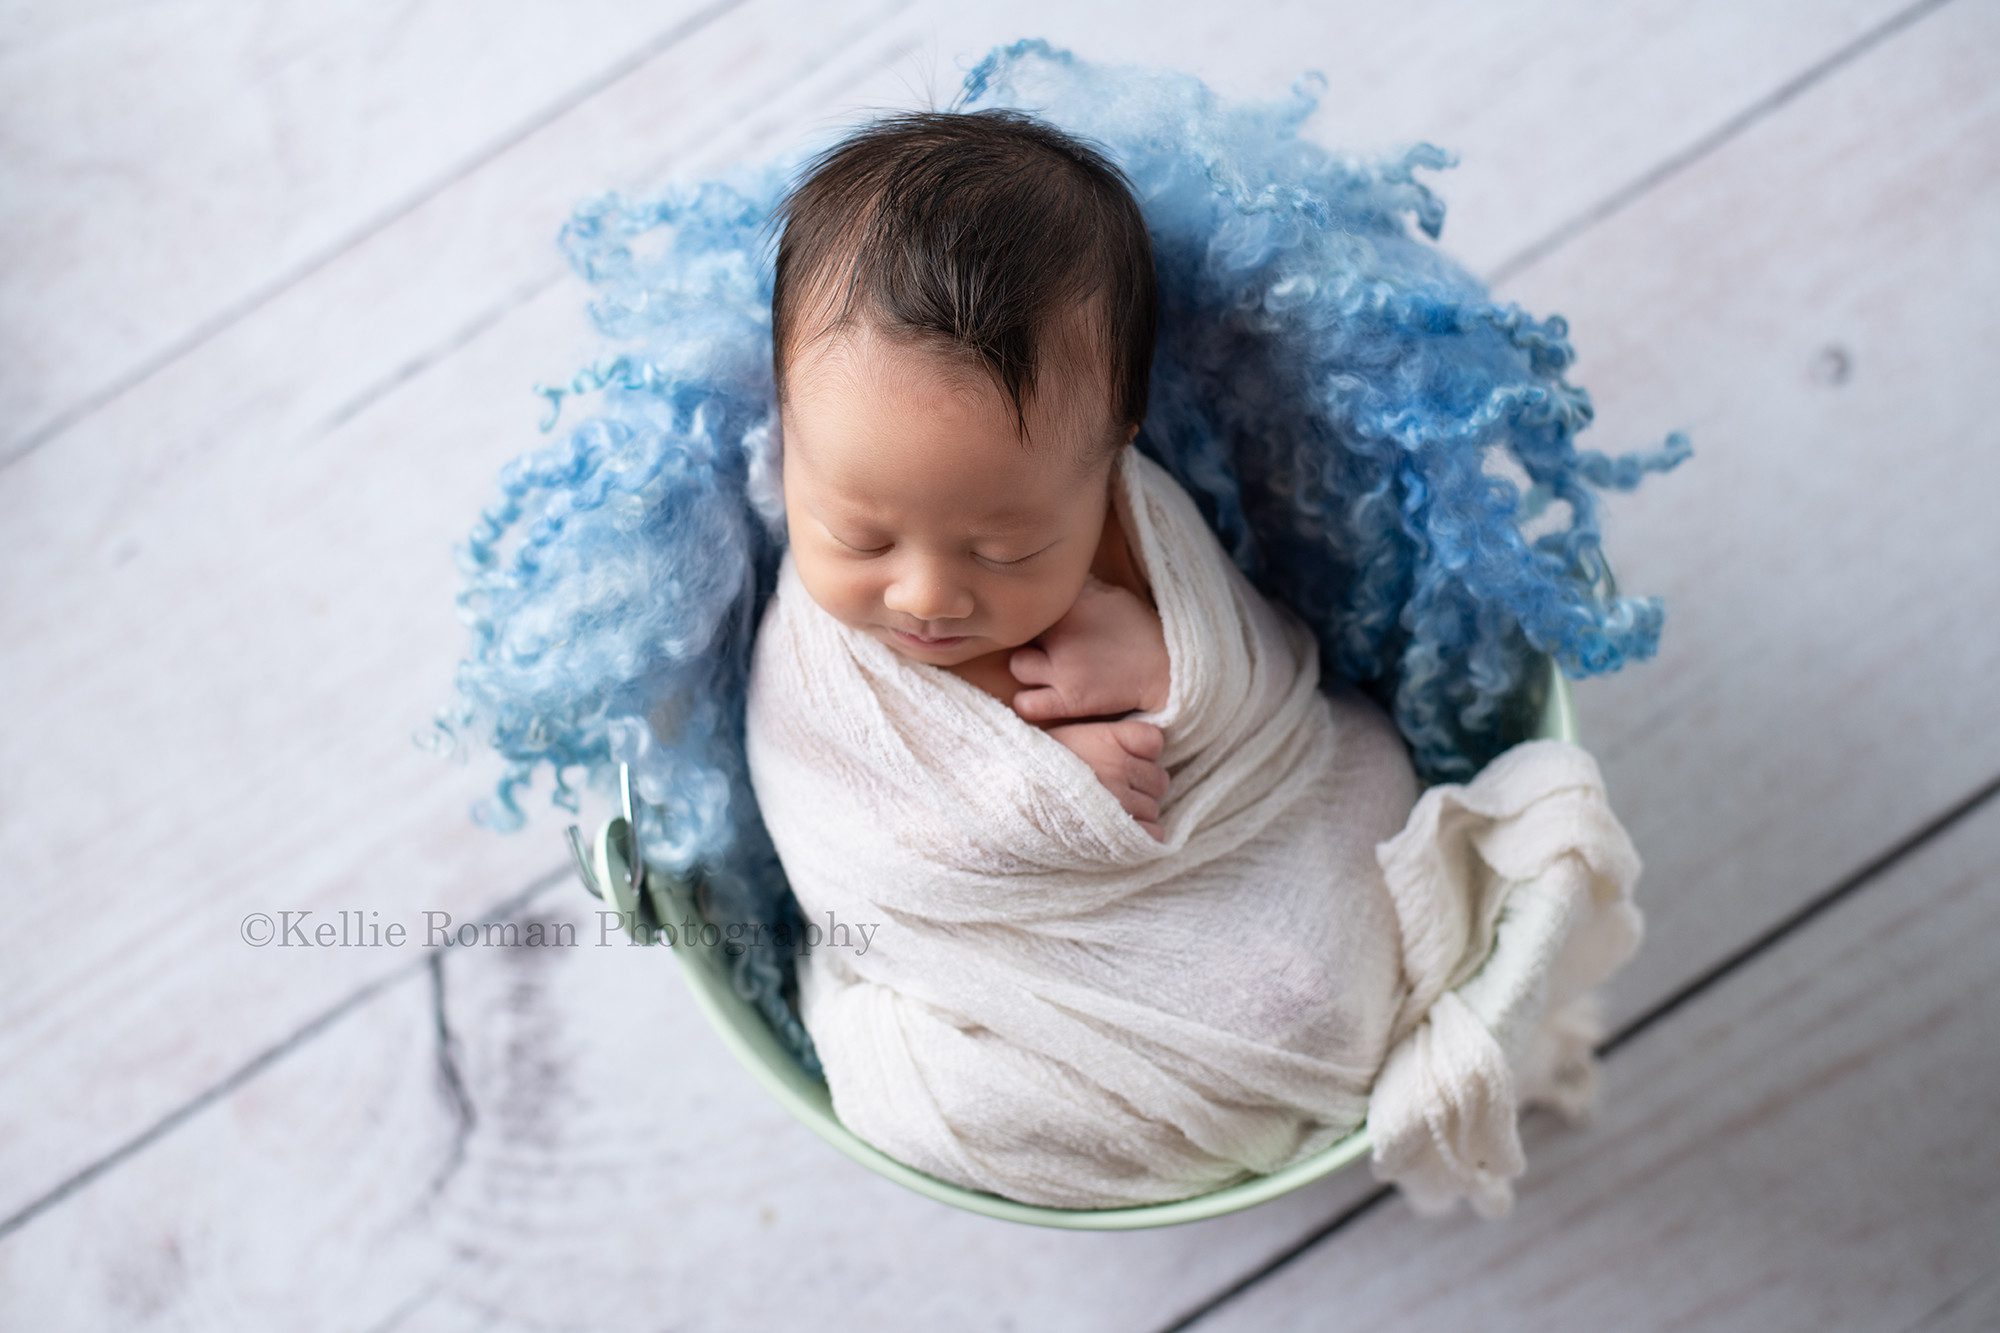 bright airy newborn session a little baby boy in a milwaukee photo studio is swaddled in a white wrap he is resting on his back in a metal mint bucket with blue fur the bucket is on top of a white floor. The baby has his hands resting on his chest.